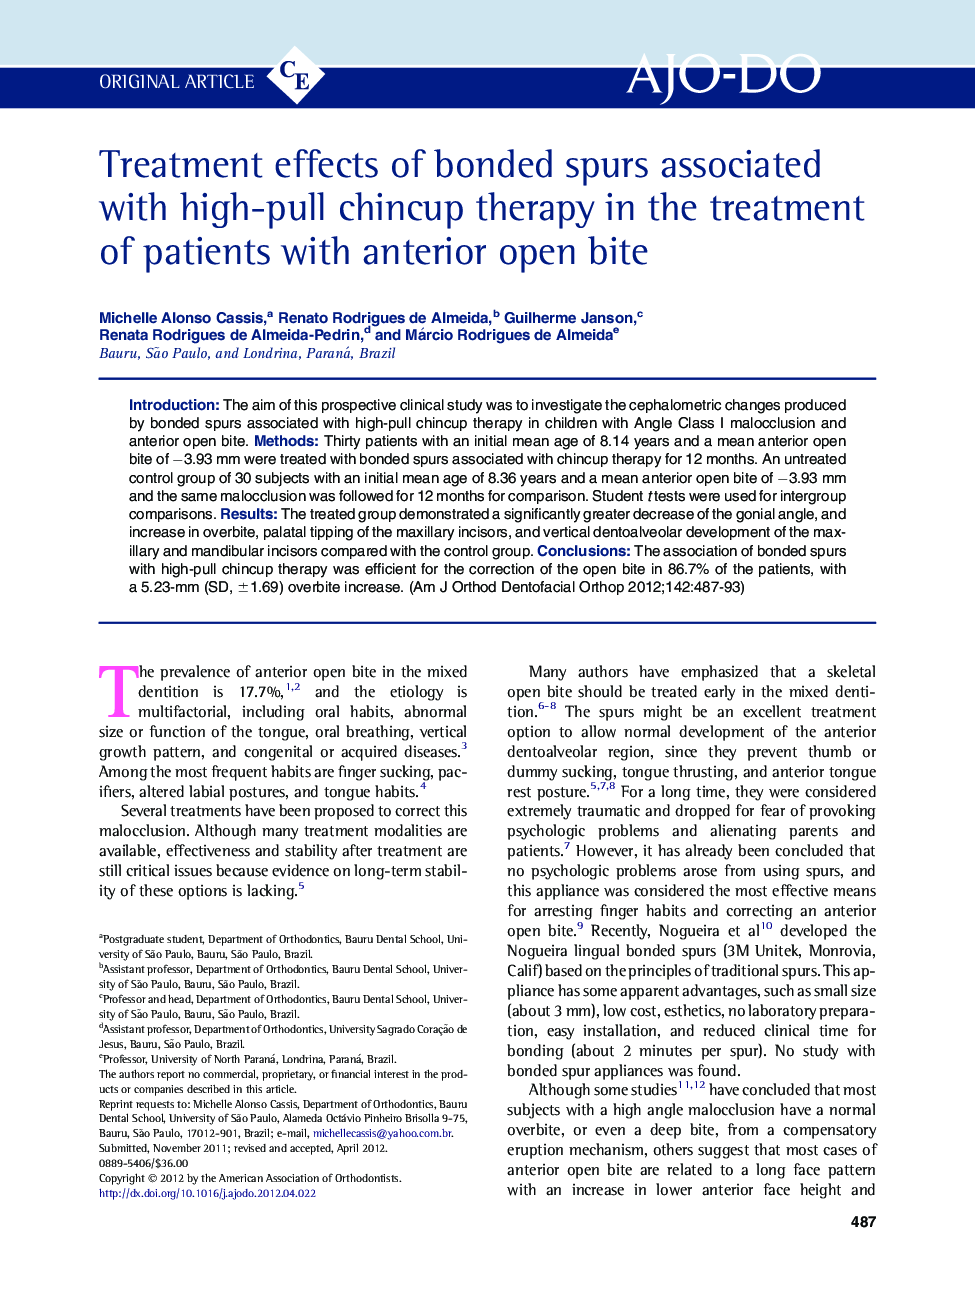 Treatment effects of bonded spurs associated with high-pull chincup therapy in the treatment of patients with anterior open bite 